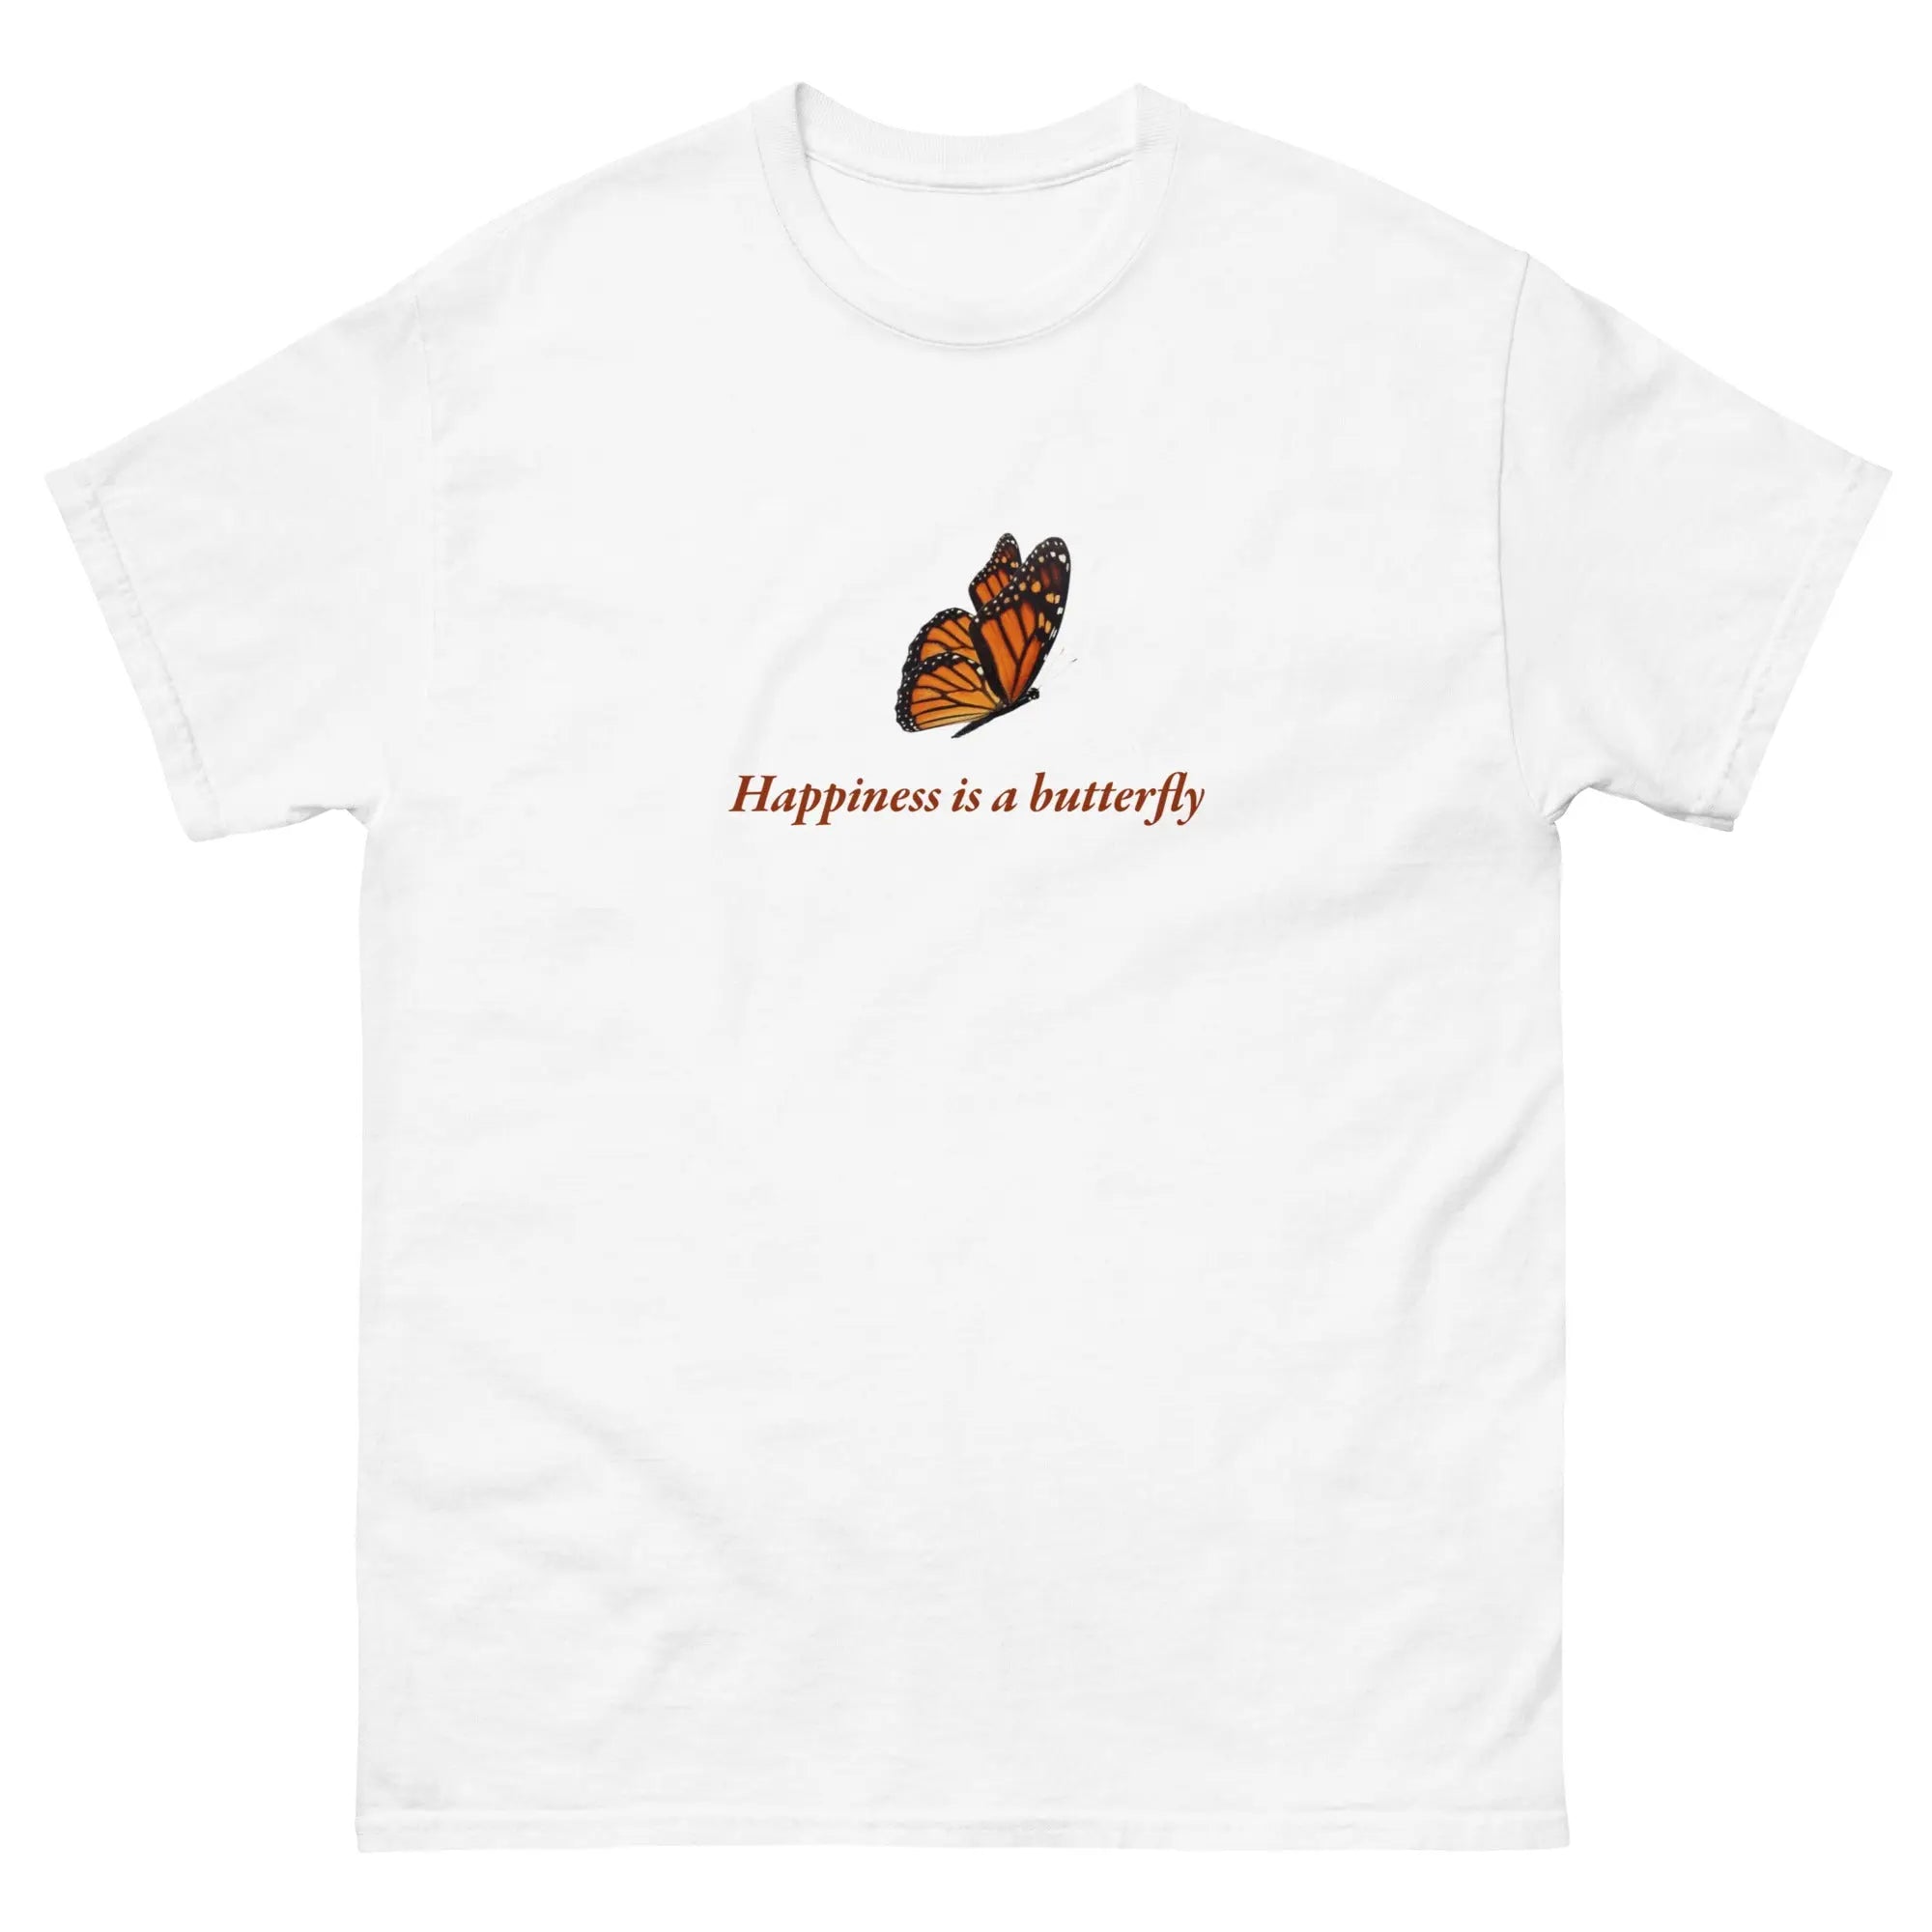 Happiness is a butterfly Tee INVETITUM